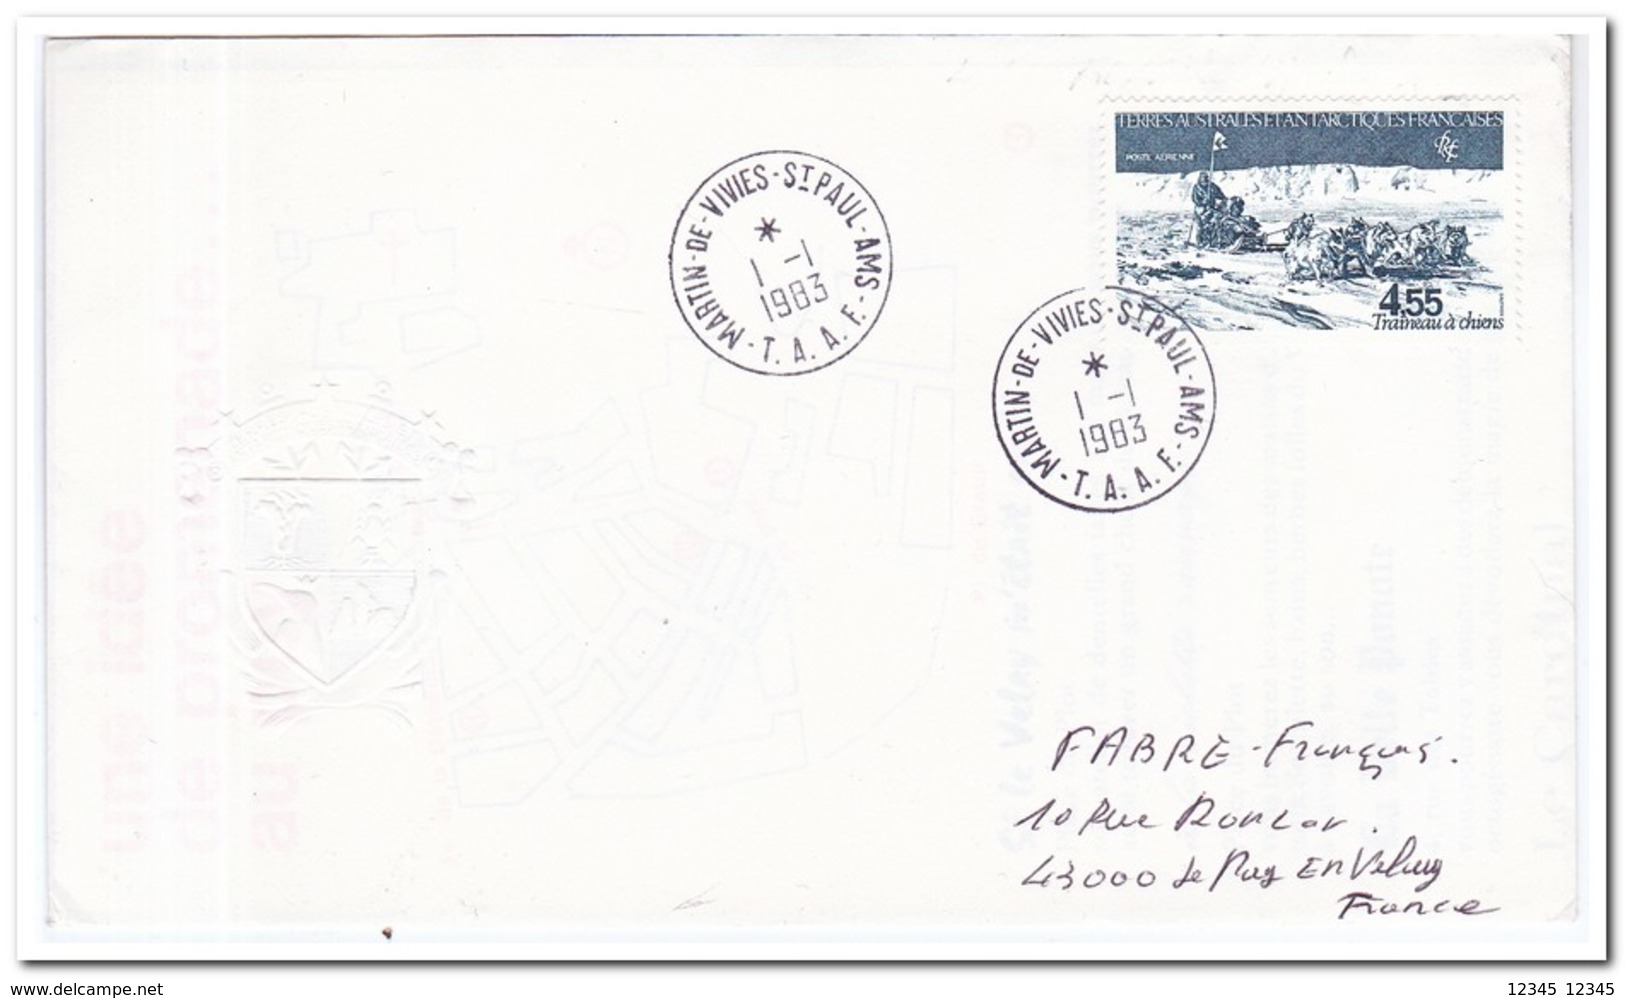 Frans Antarctica 1983, FDC, Polar Research, FDC To Le Puy En Velay - FDC